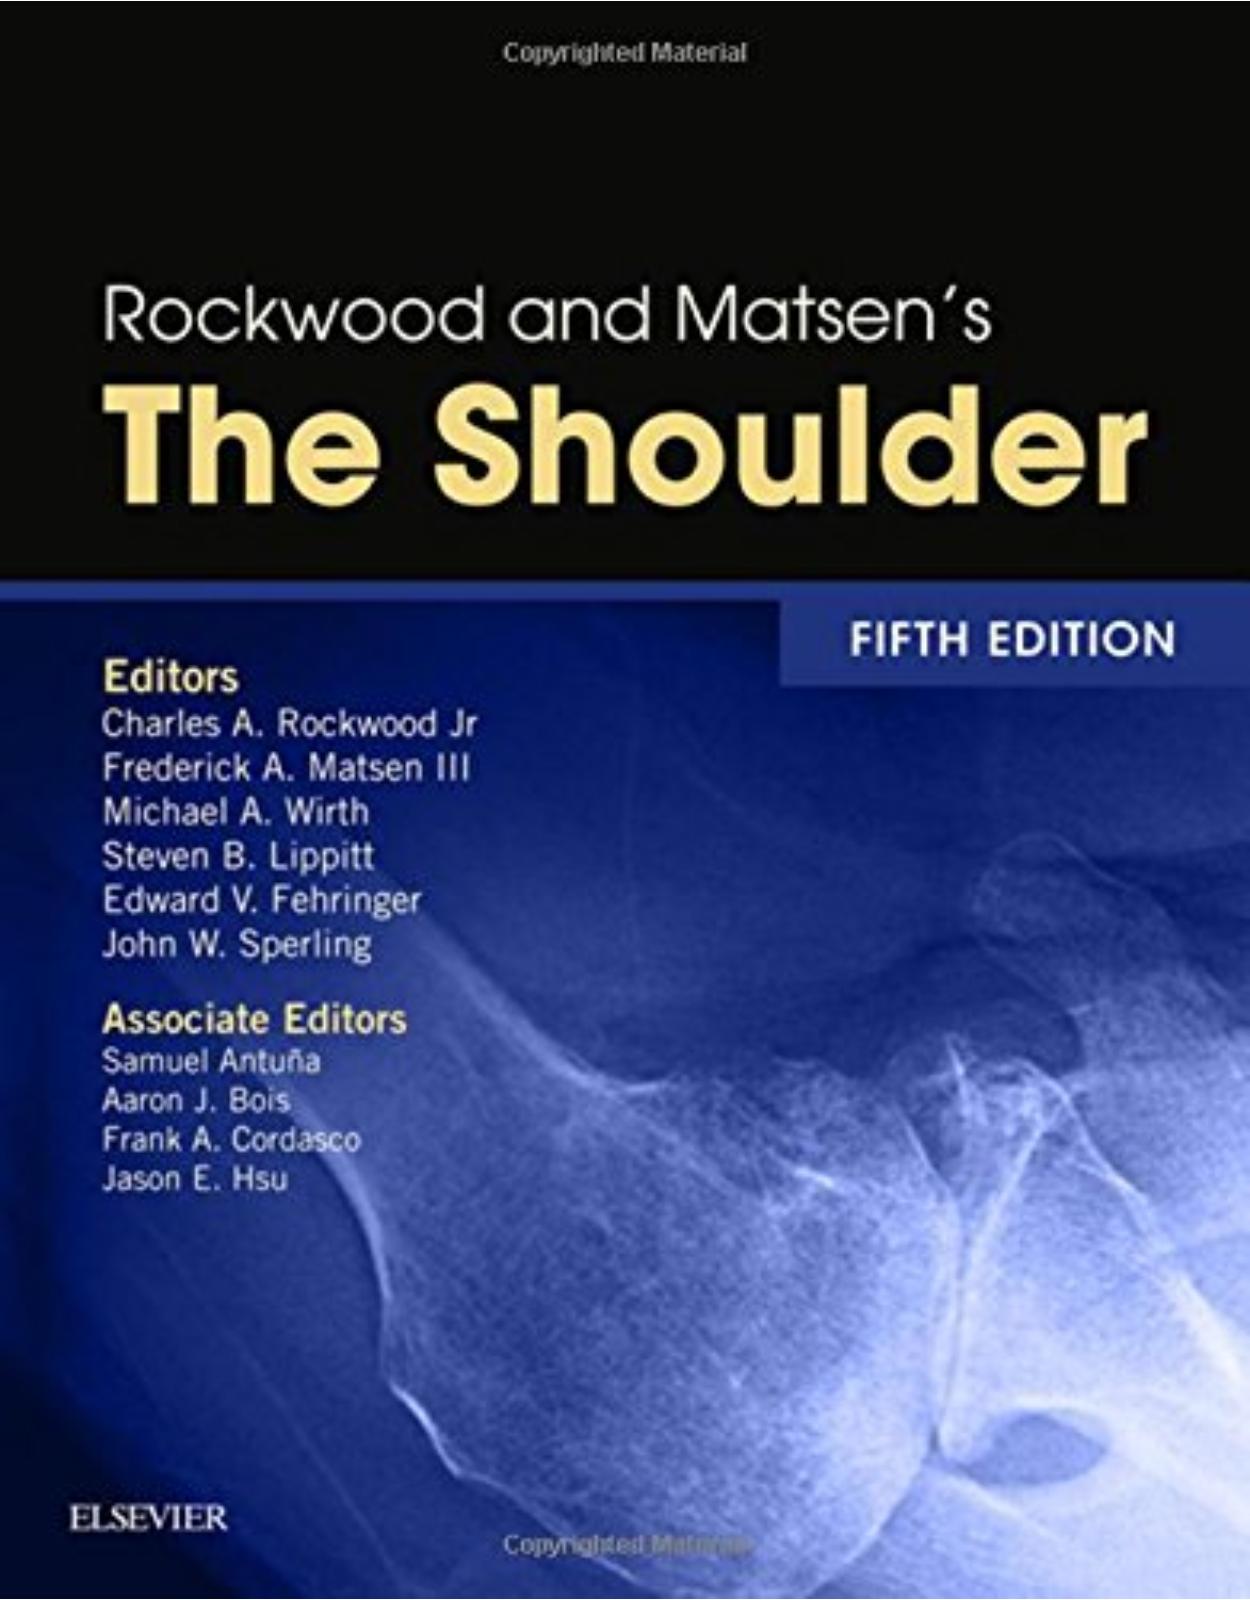 Rockwood and Matsen's The Shoulder, 5th Edition